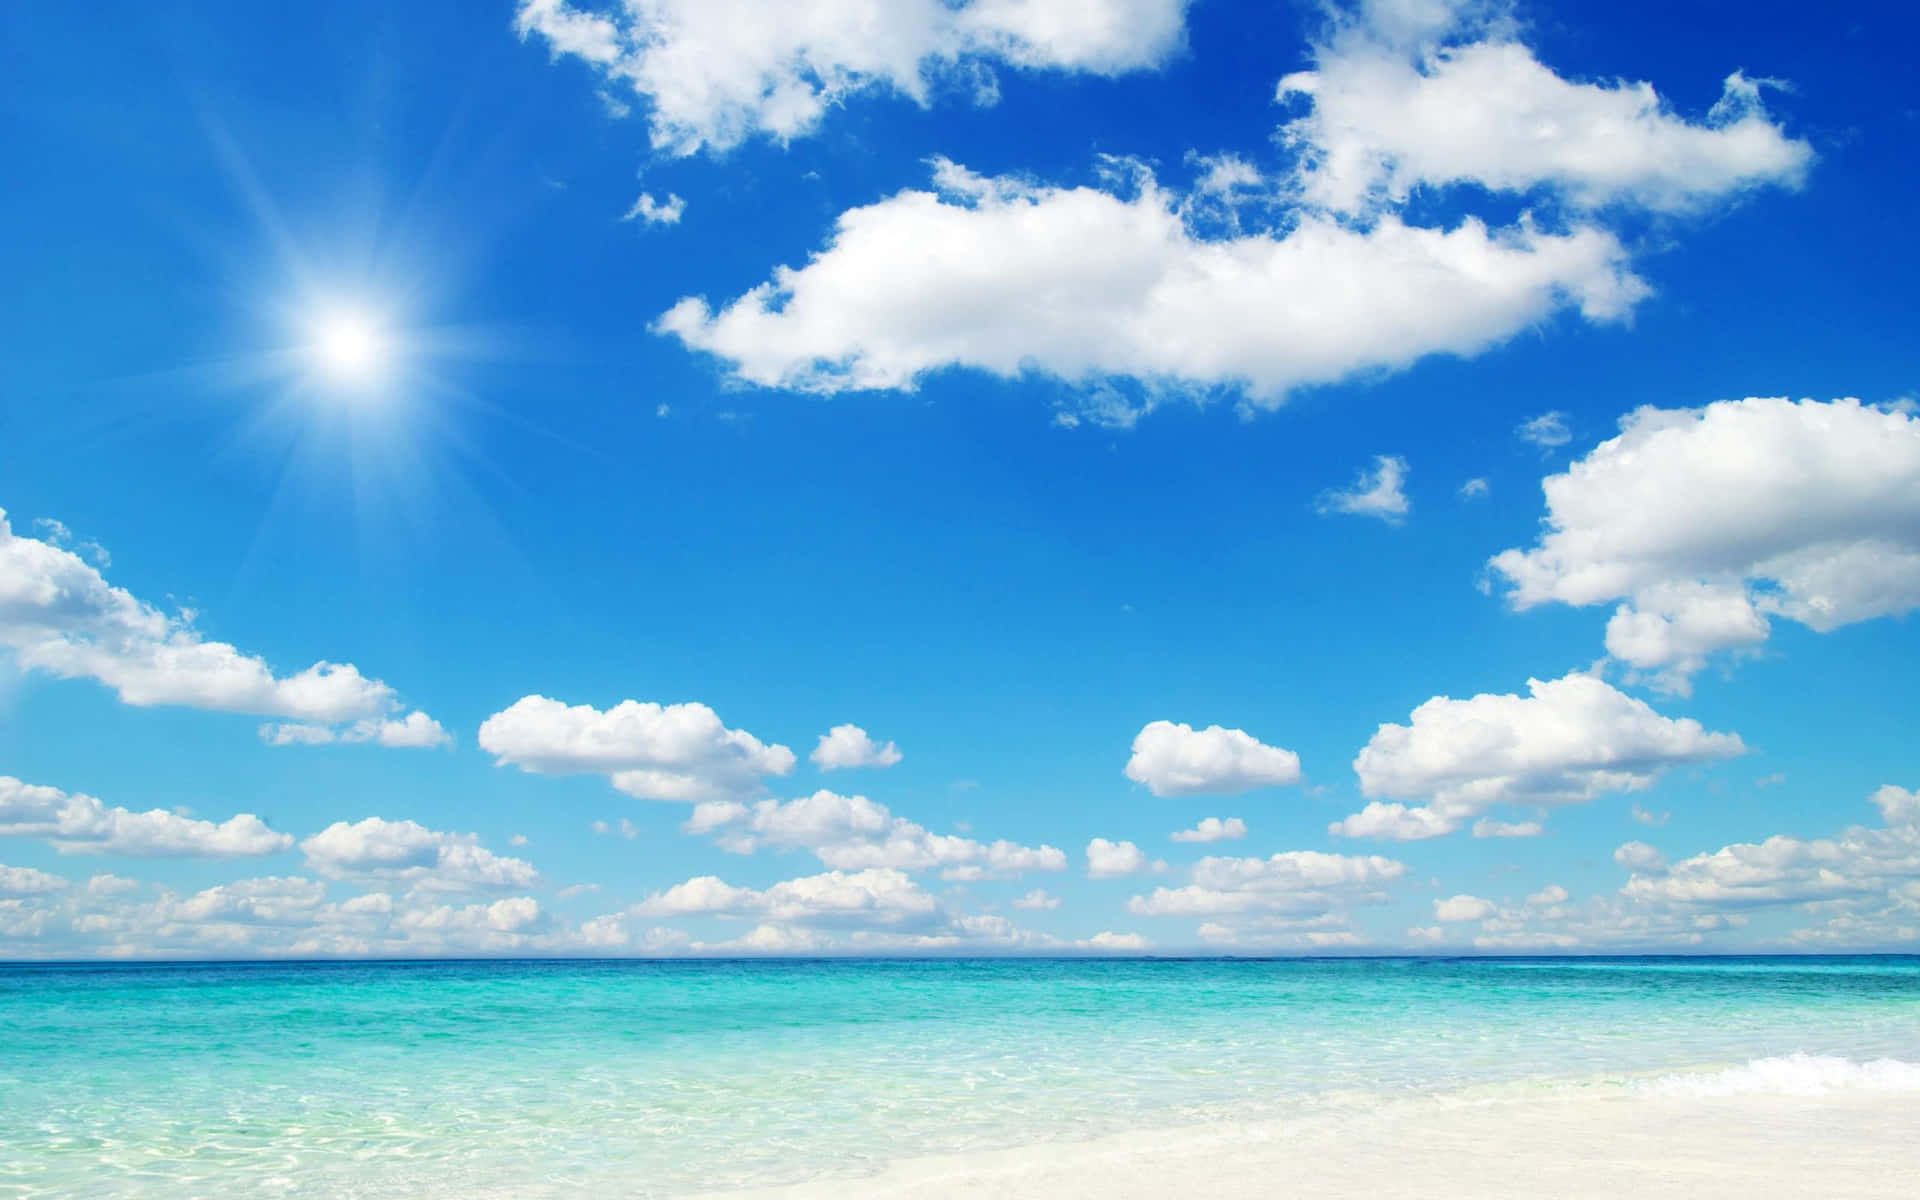 Take in the beauty of a golden beach beneath a majestic sky Wallpaper